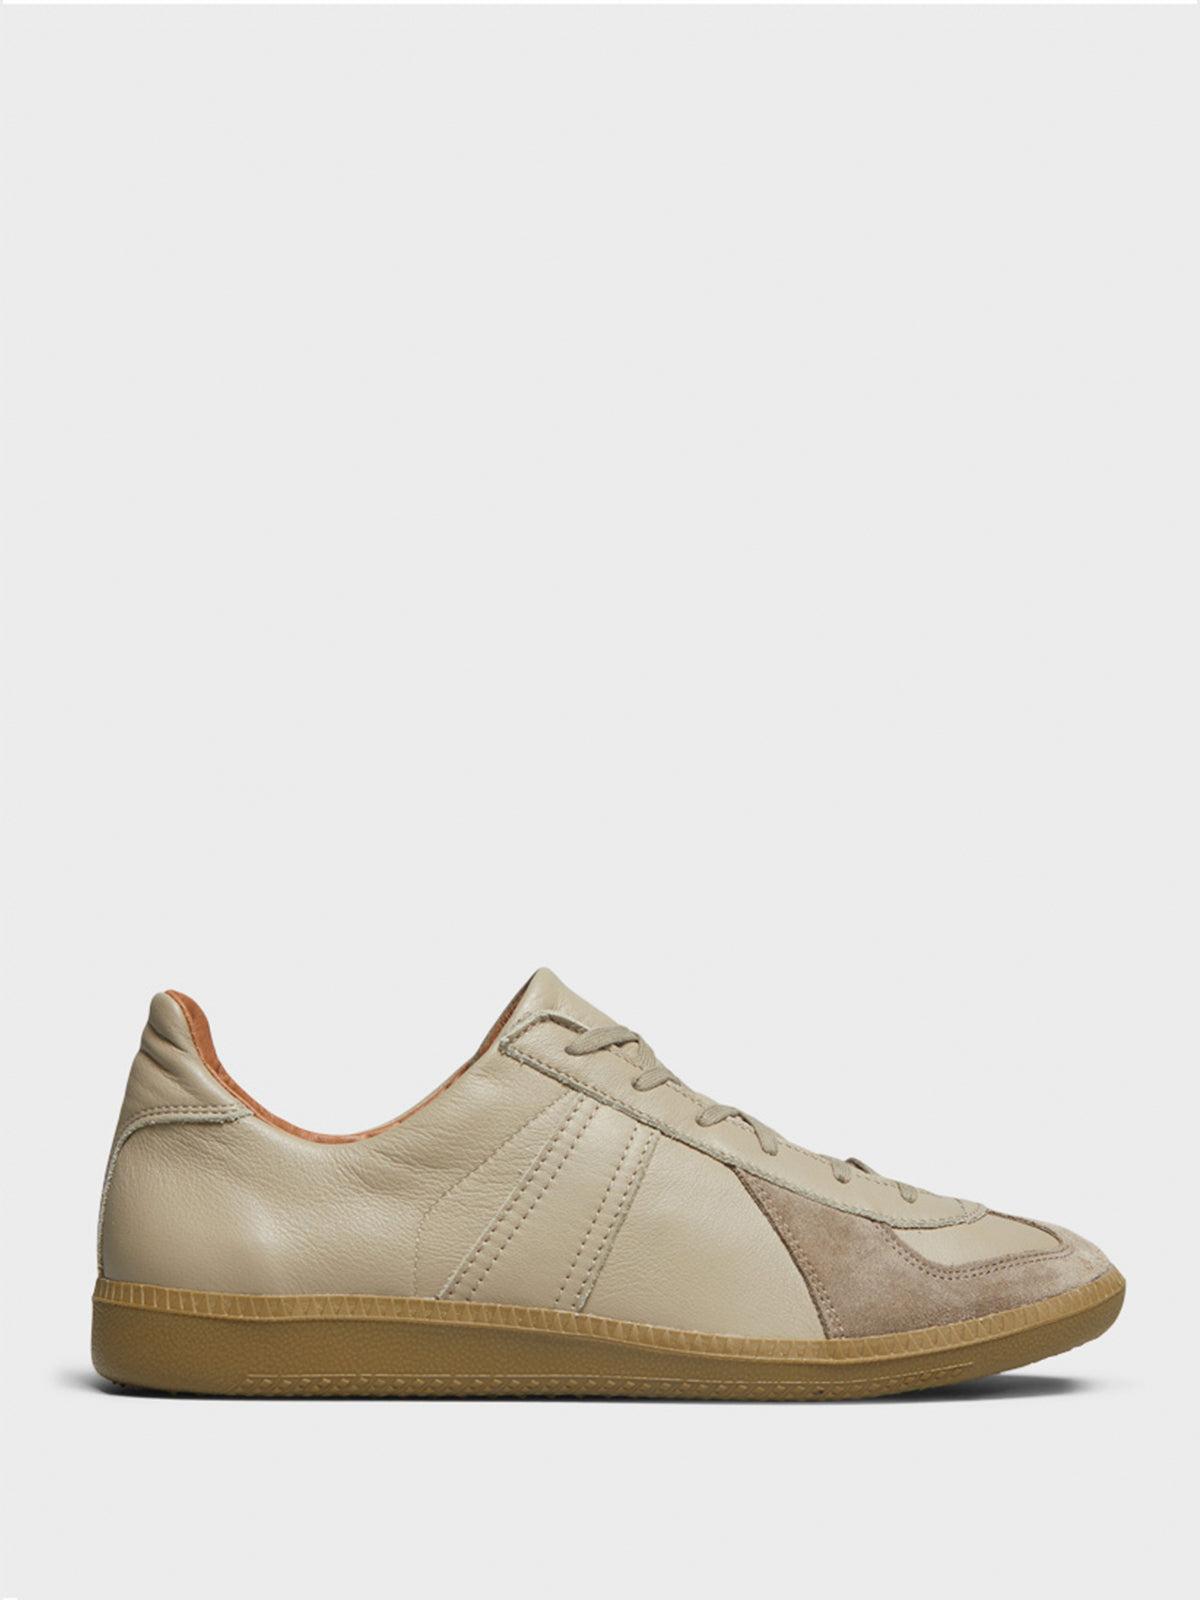 Reproduction of Found - 1700L German Military Sneakers in Beige Khaki